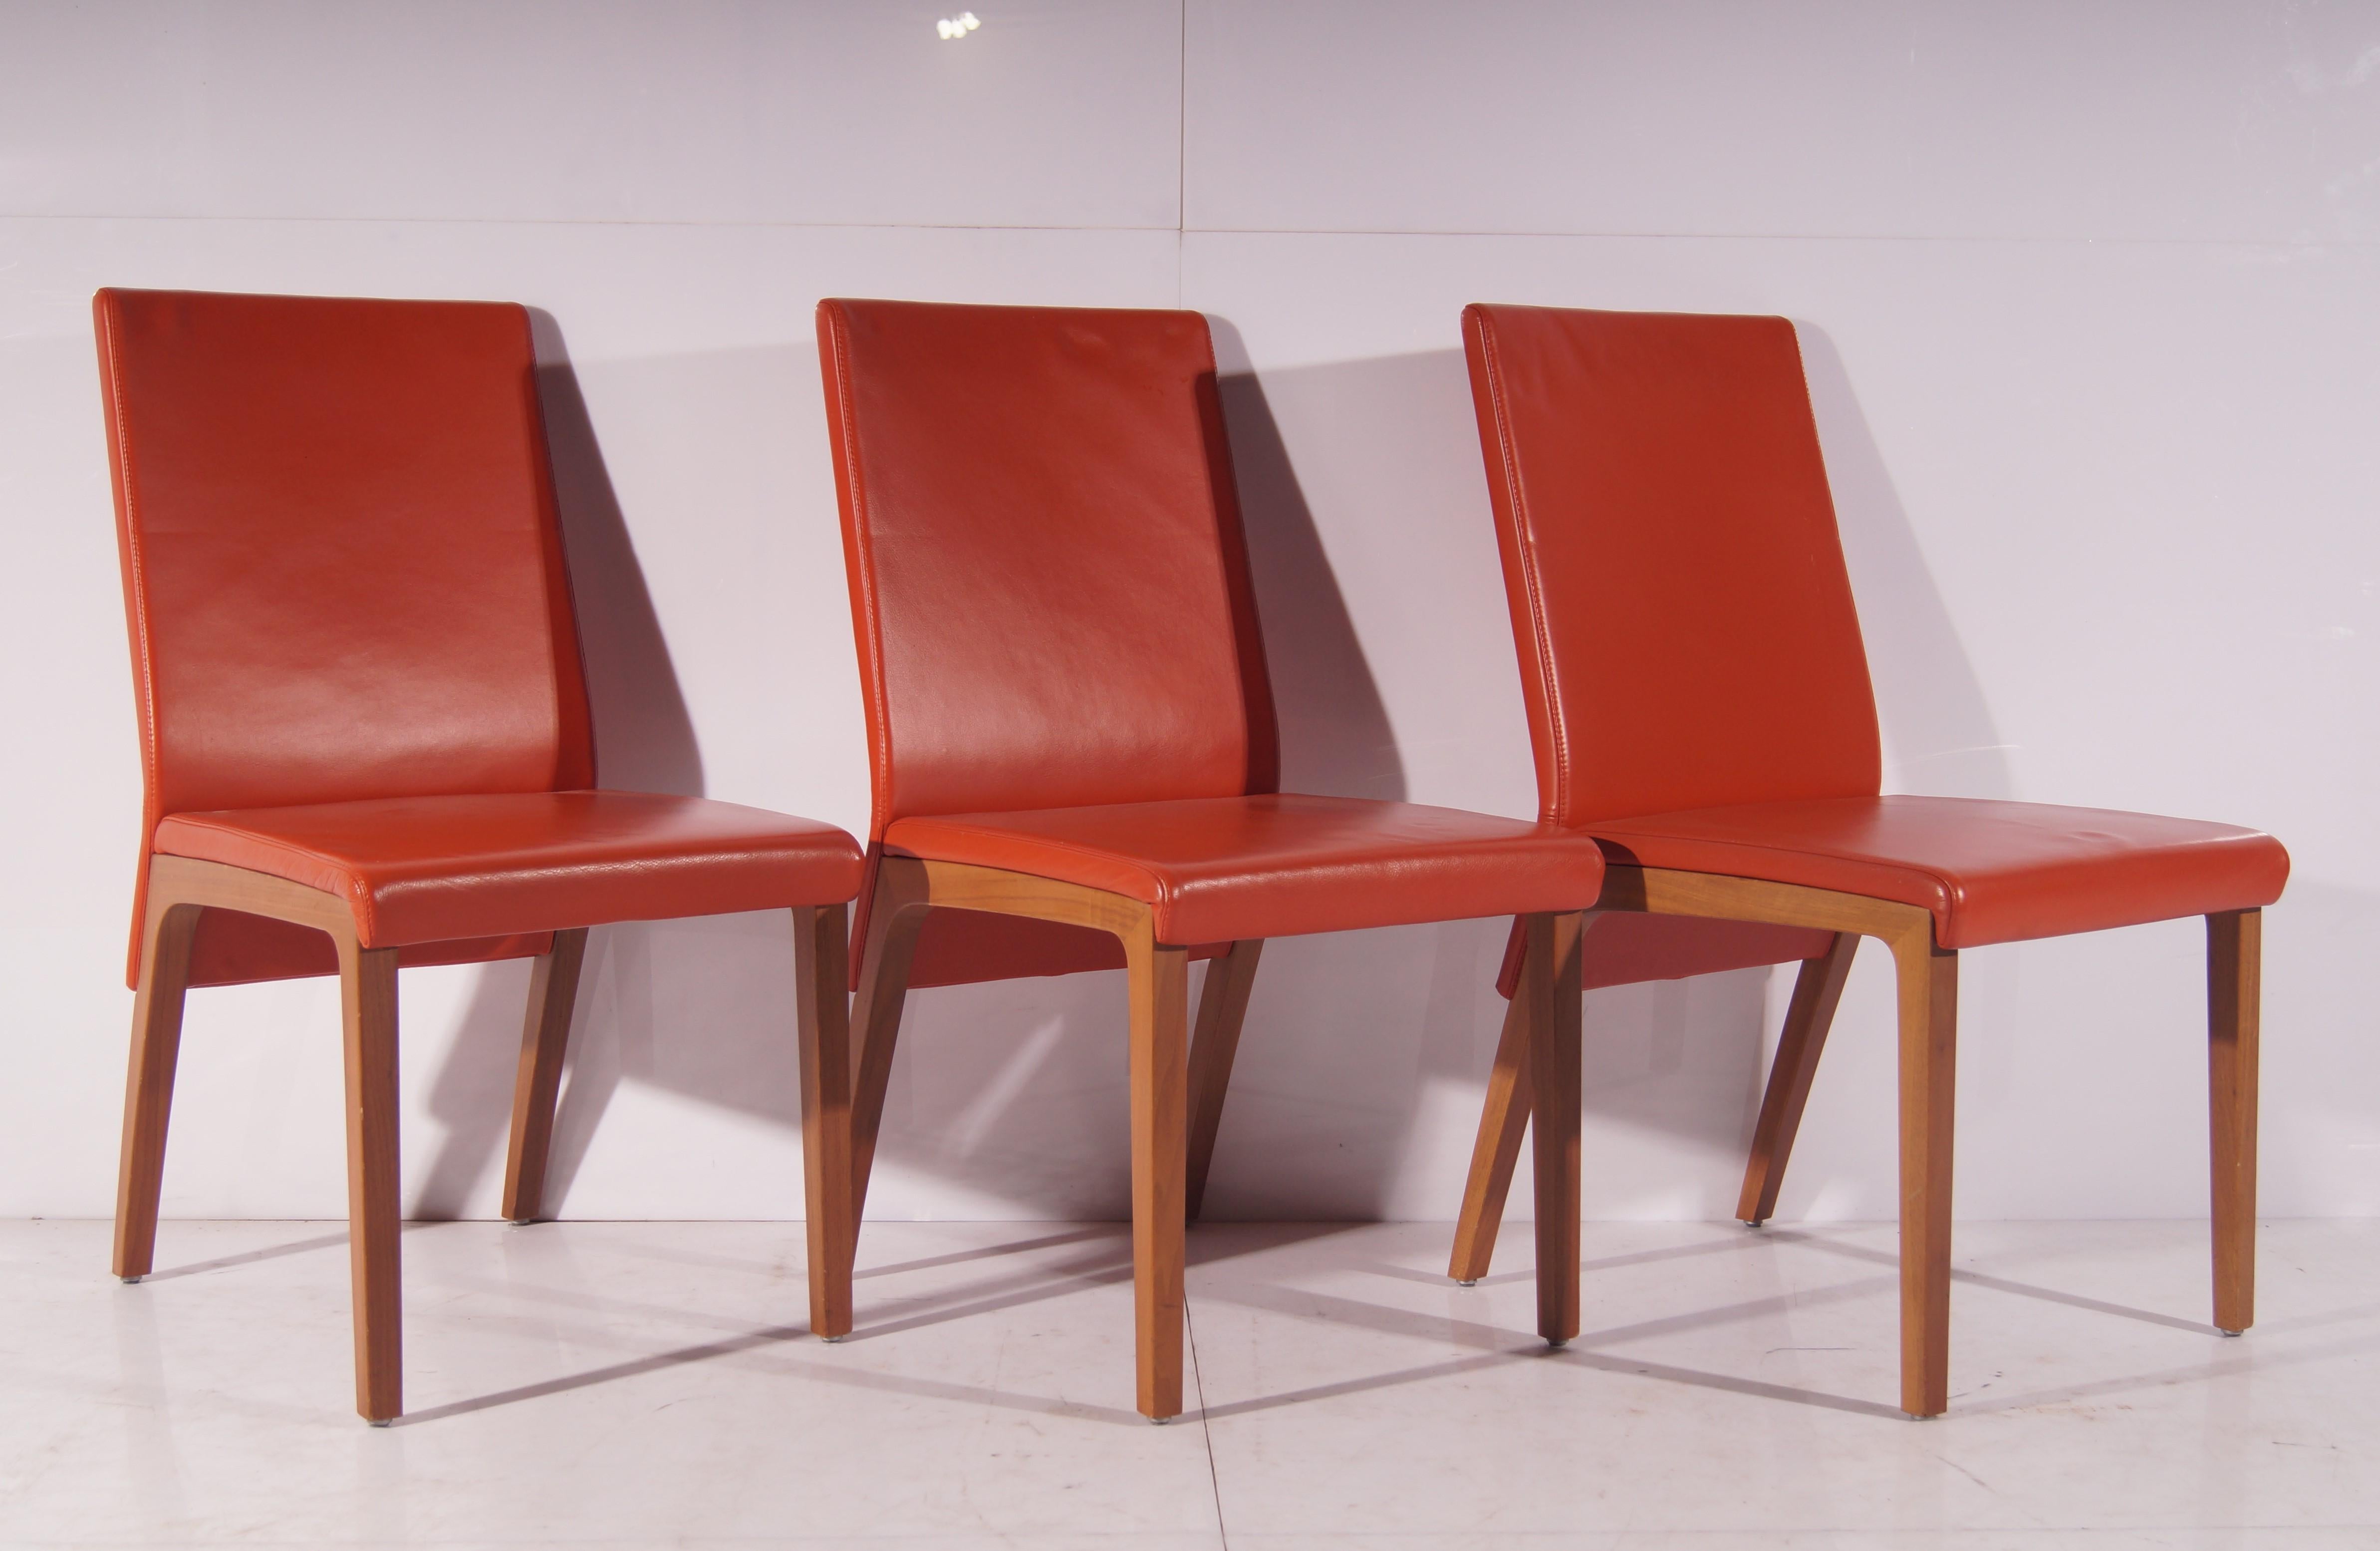 Rolf Benz - Dining room chair in orange leather 7